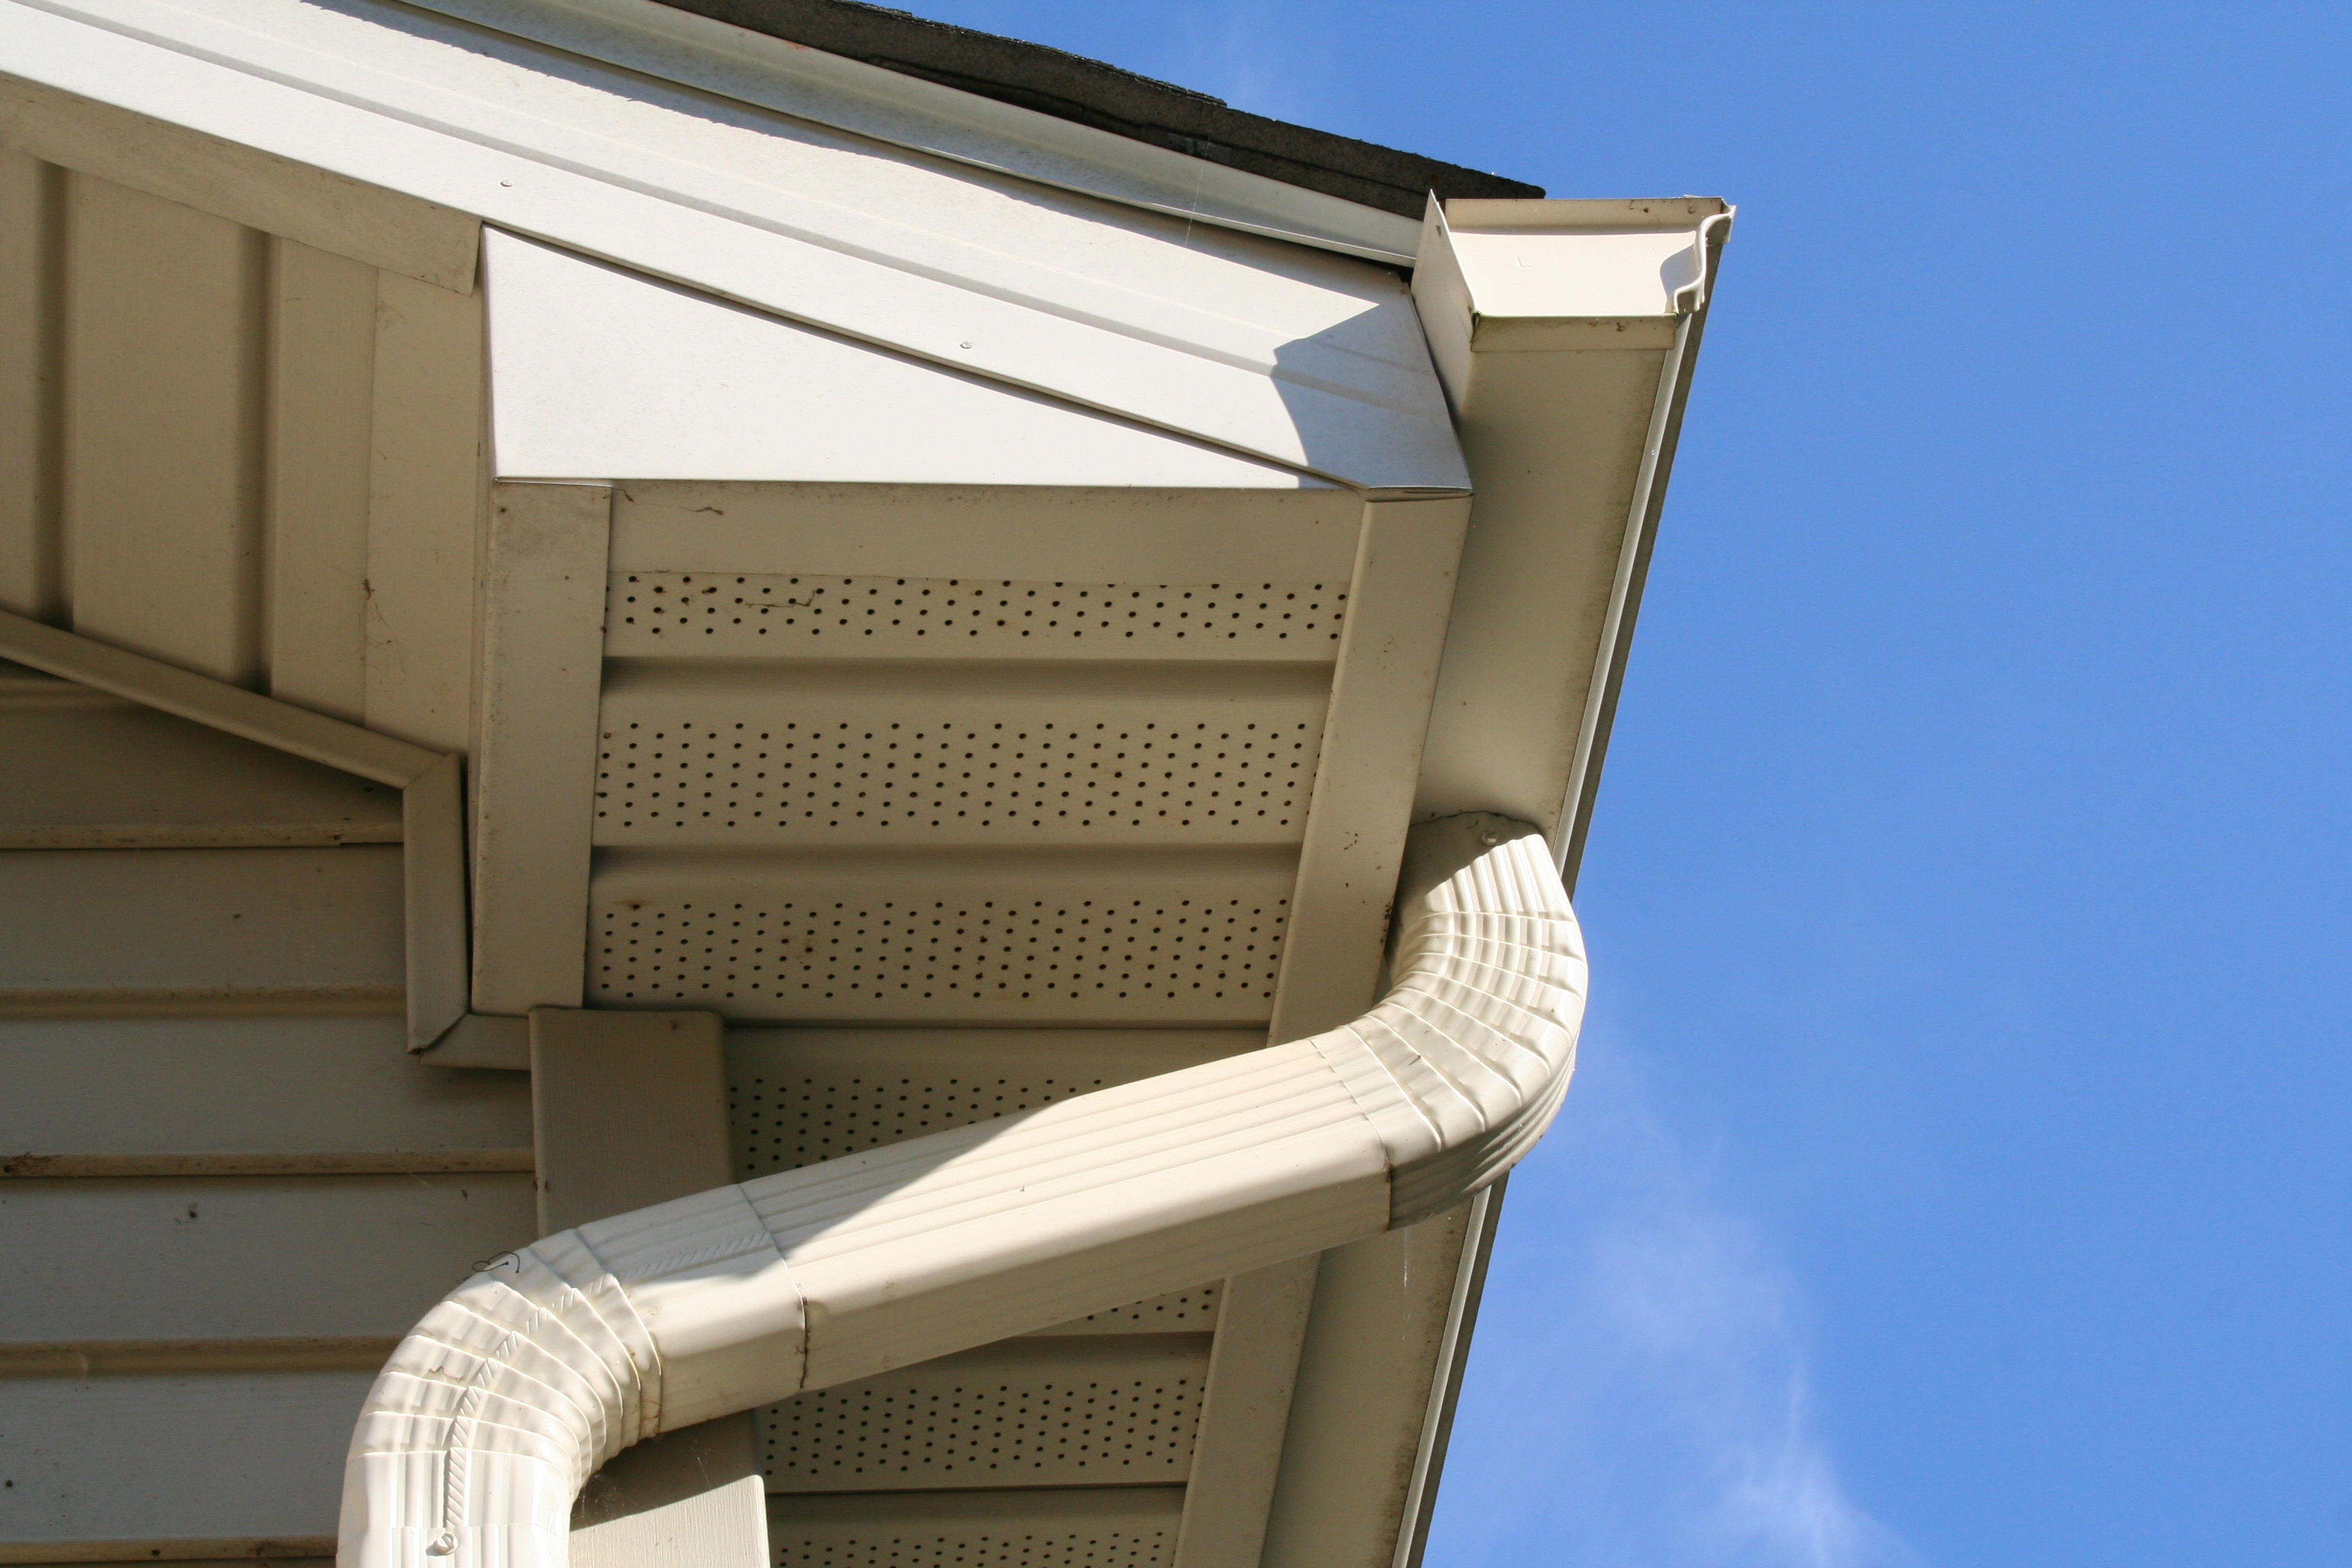 Gutters and downspouts help protect the foundation of your home from water damage and mold.  Call Daugherty Roofing 814 today for your free quote.  814-825-0780